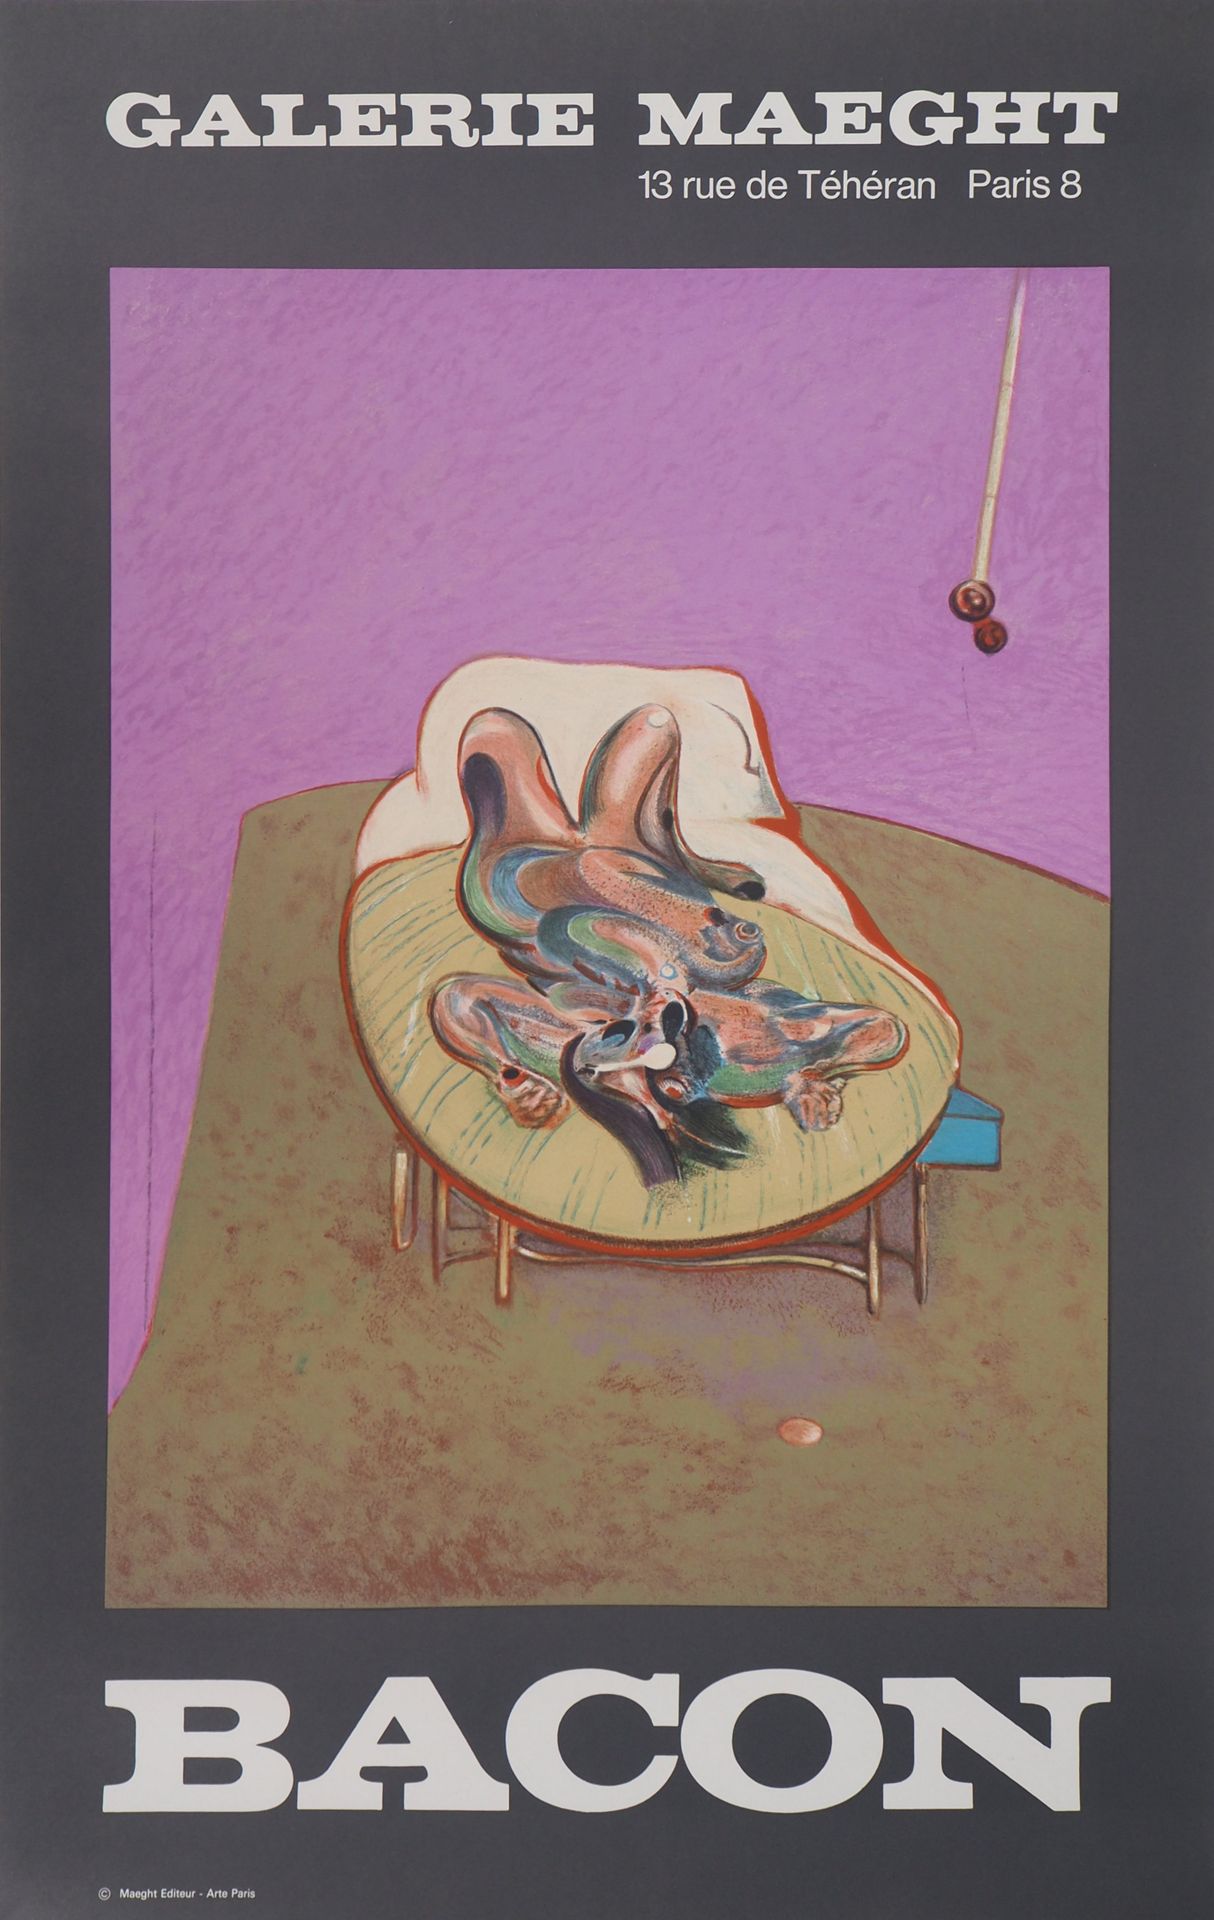 FRANCIS BACON Francis BACON (after)

Lying Nude, 1966

Lithograph after a painti&hellip;